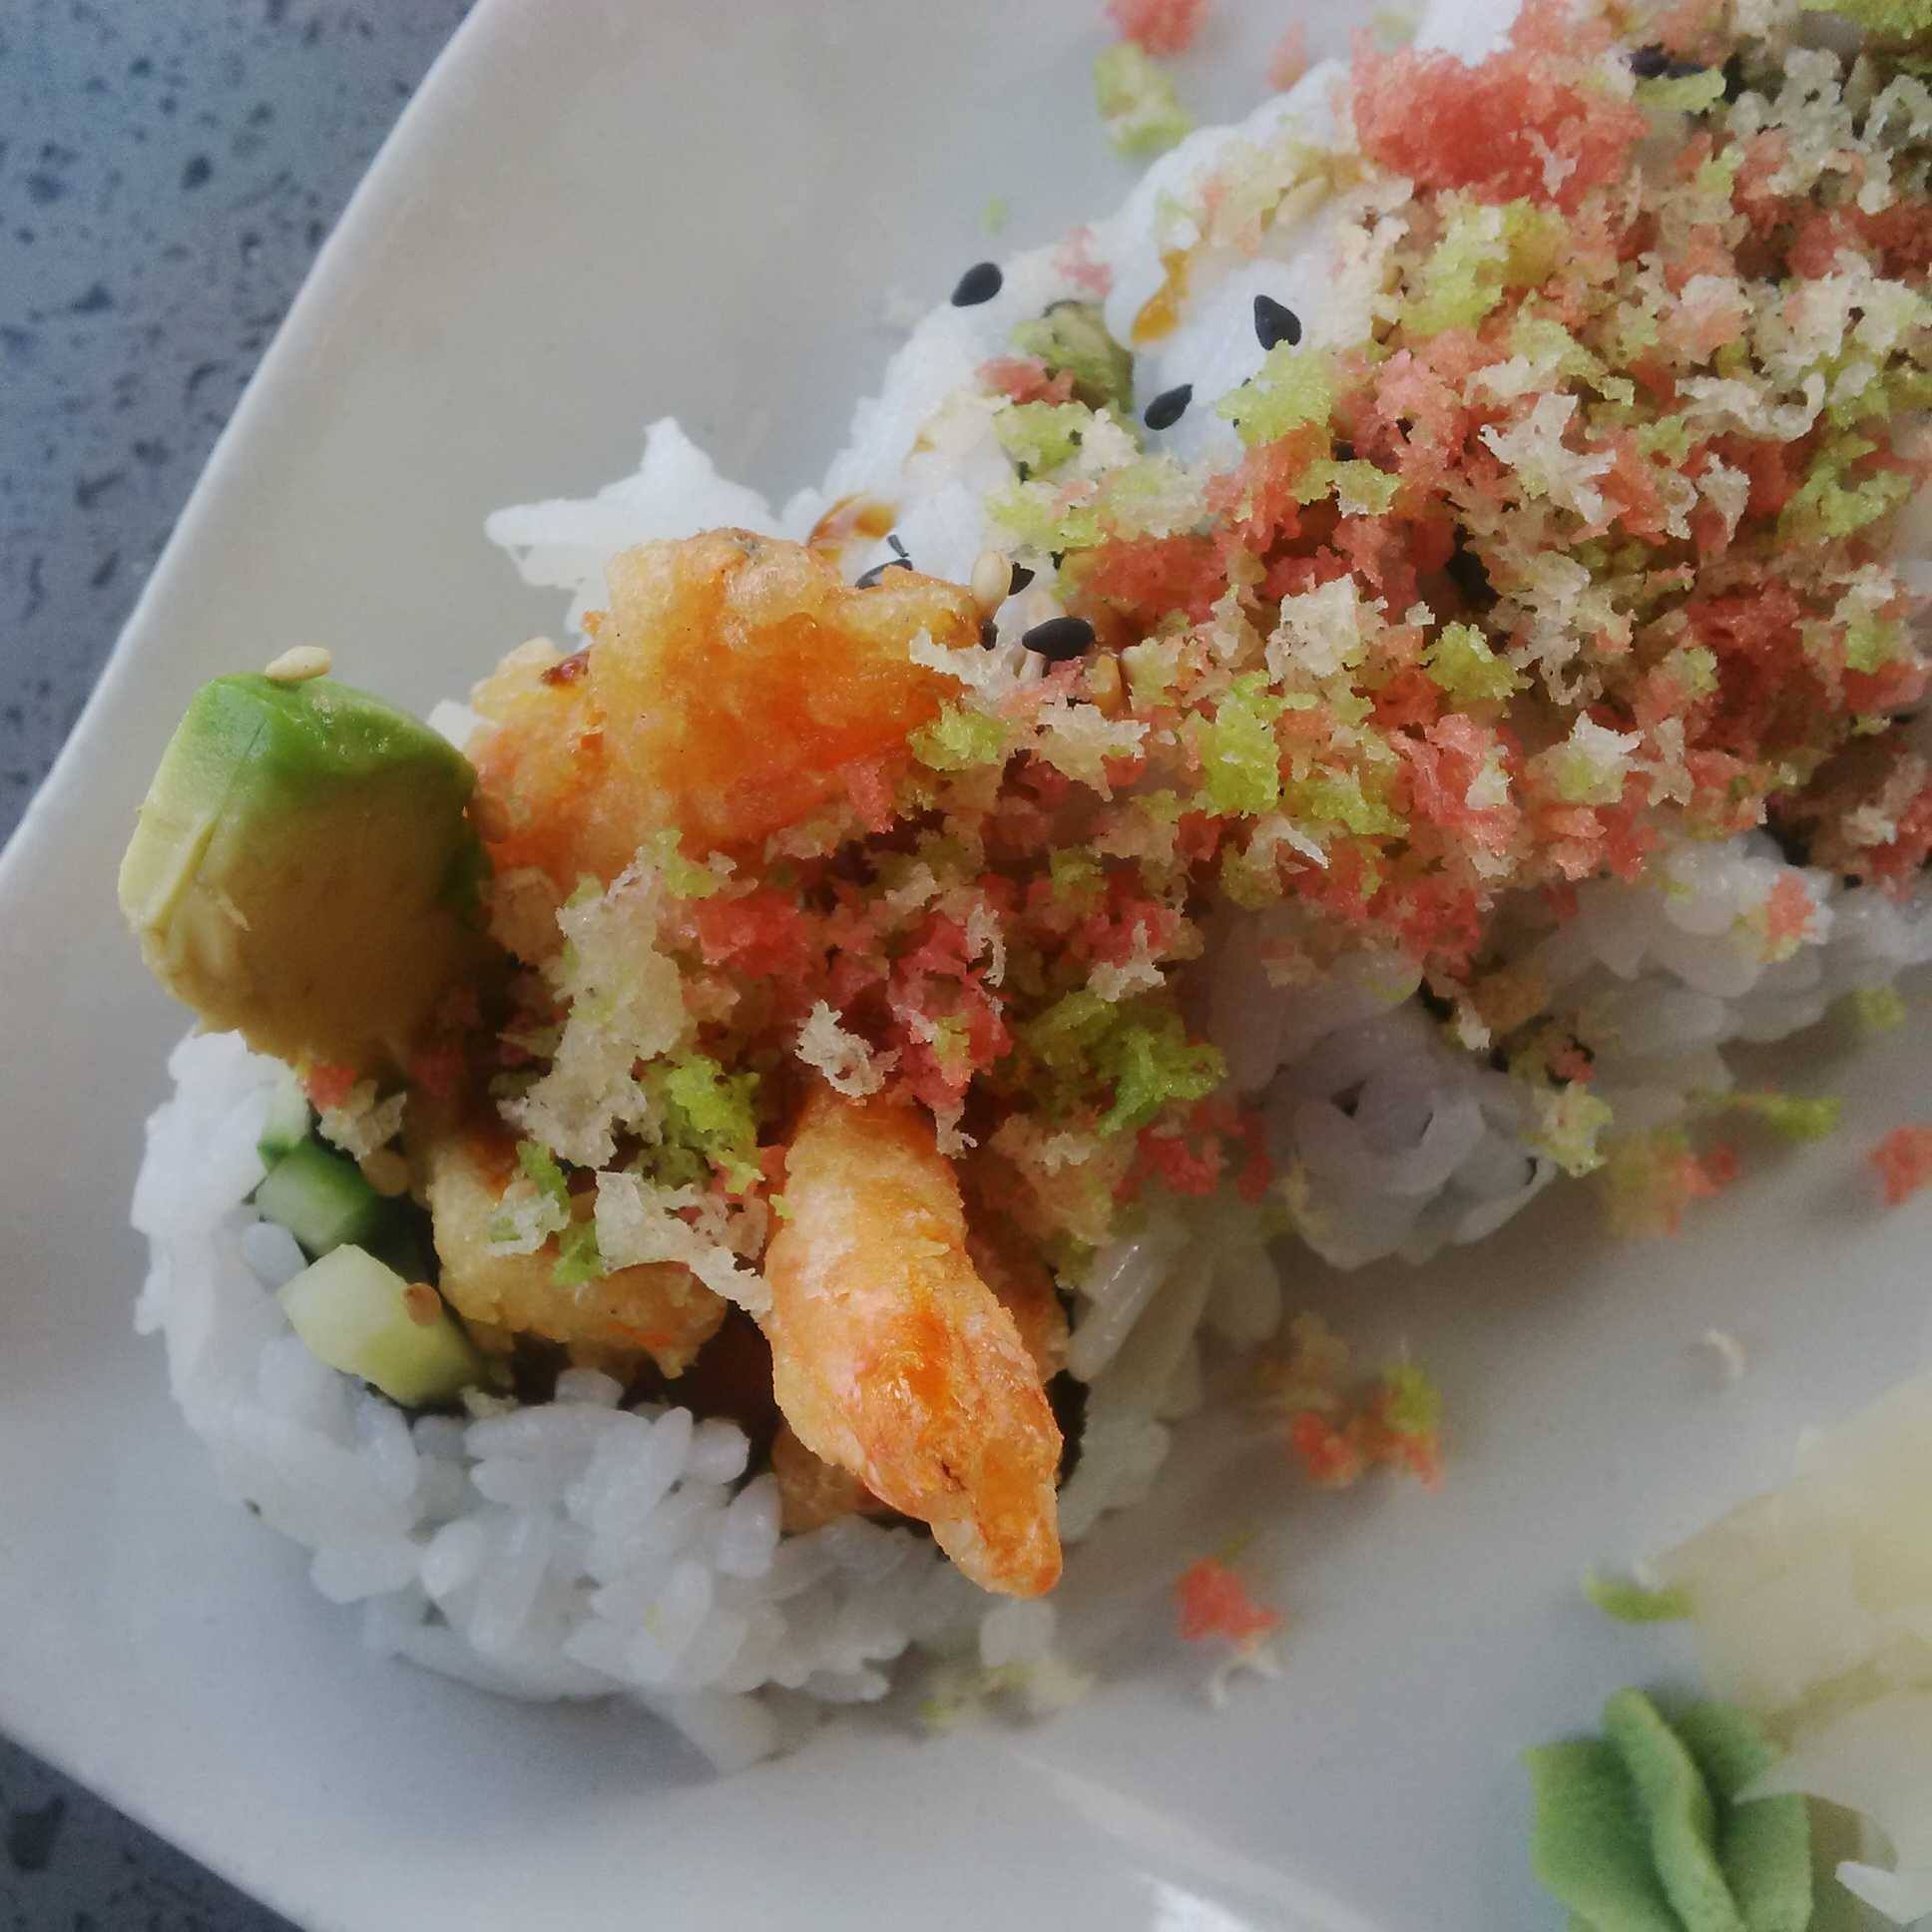 Ono’s Sushi brings a modern touch to Abbotsford sushi scene